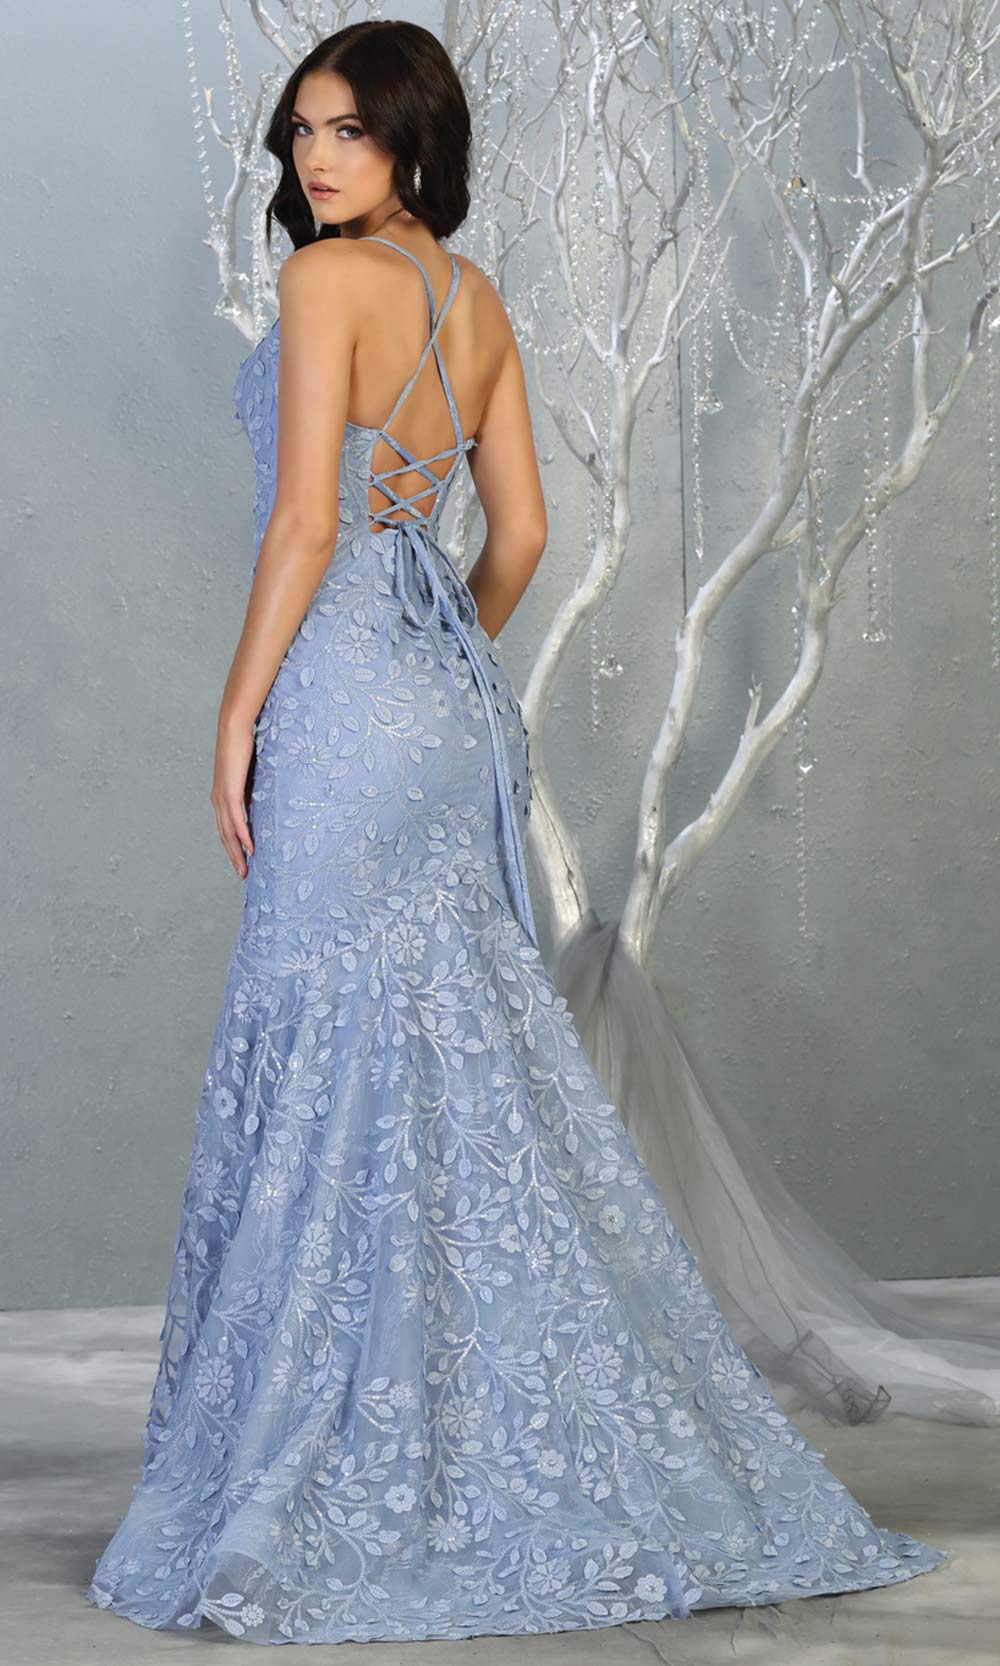 Mayqueen RQ7811 long dusty blue v neck sexy fitted lace mermaid dress w/open back. Full length light blue gown is perfect for  enagagement/e-shoot dress, formal wedding guest, indowestern gown, evening party dress, prom, bridesmaid. Plus sizes avail-b.jpg